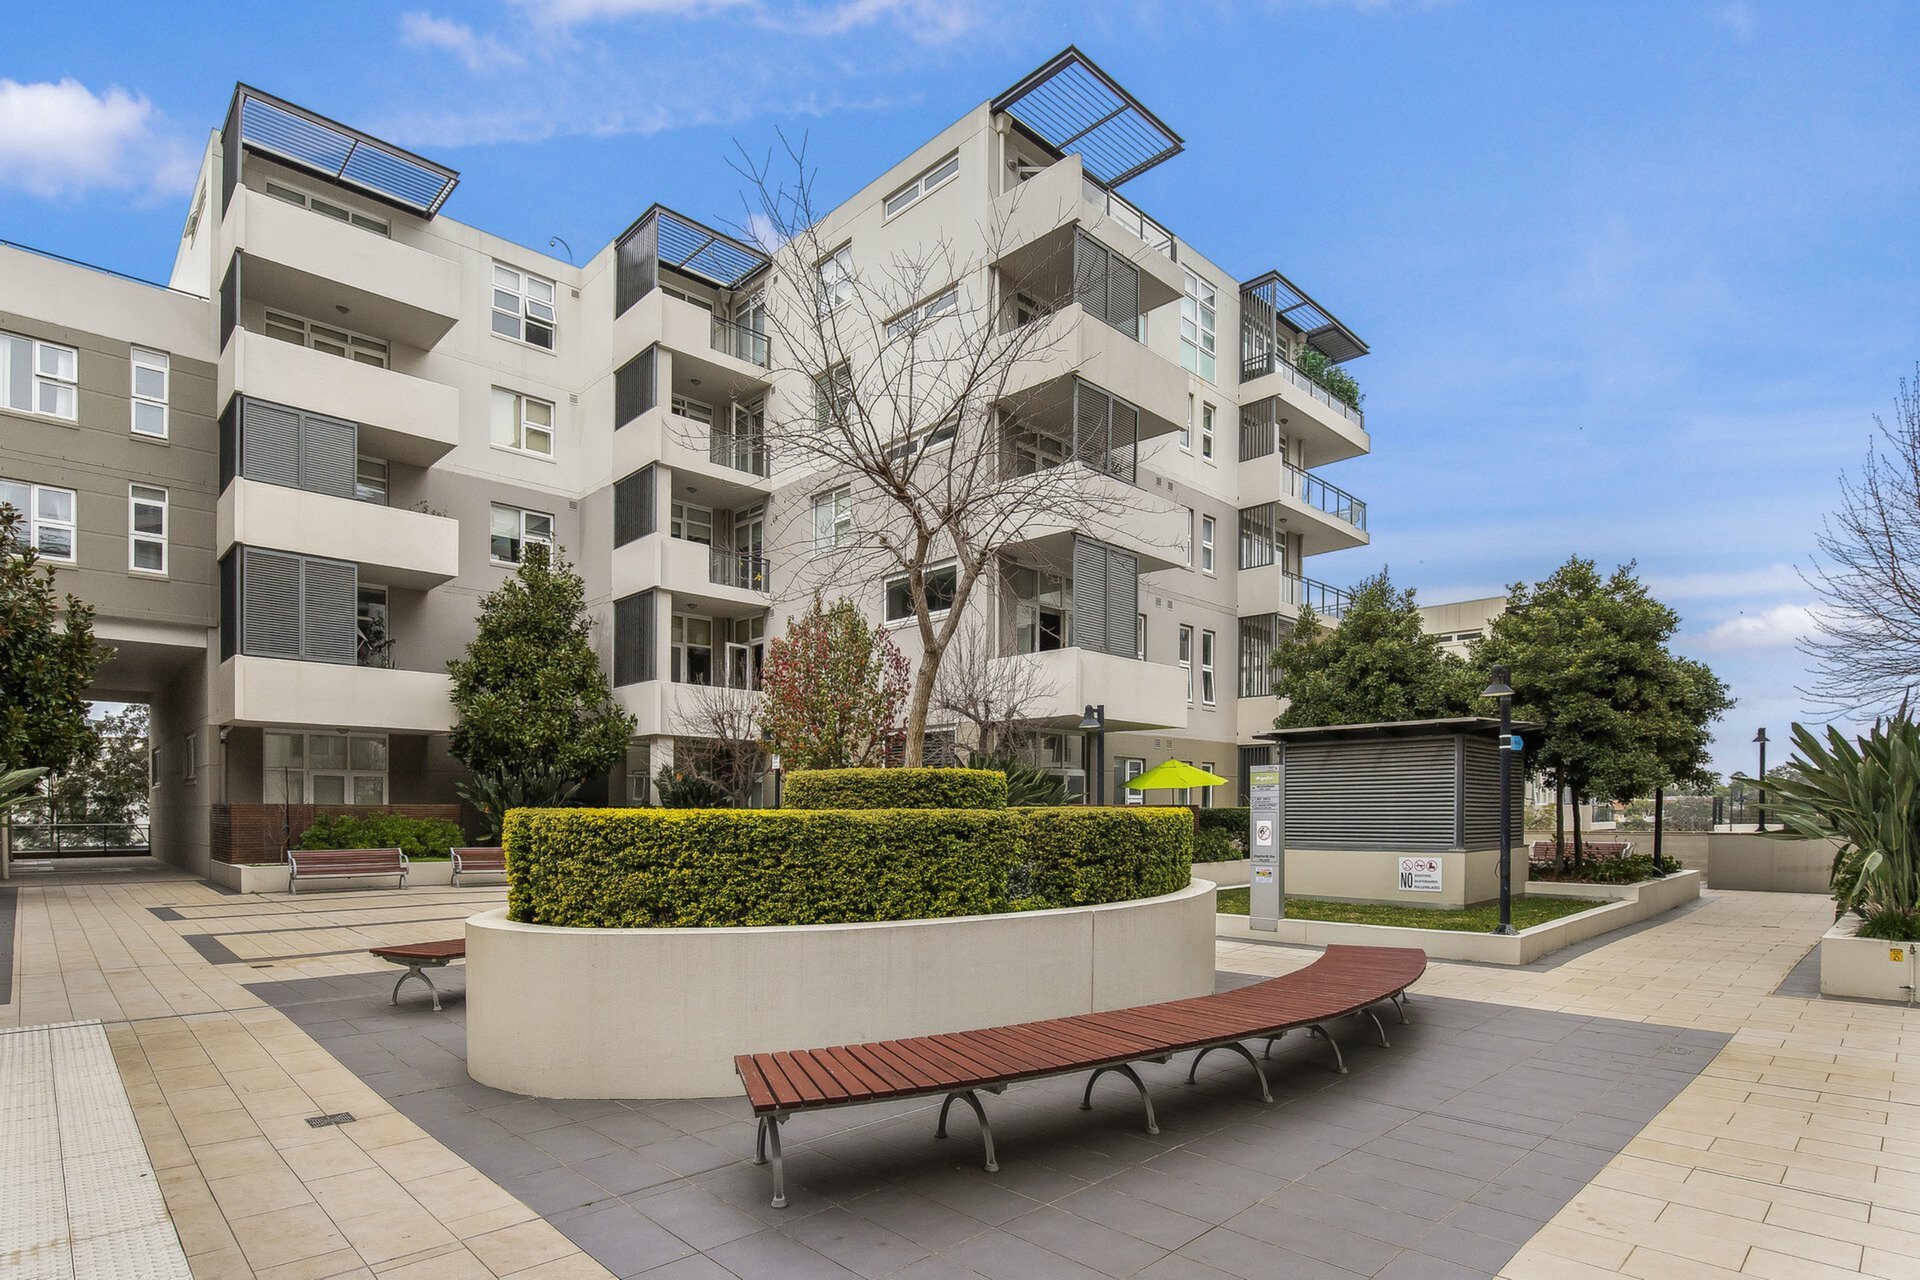 8/25 Angas Street, Meadowbank Sold by Cassidy Real Estate - image 1